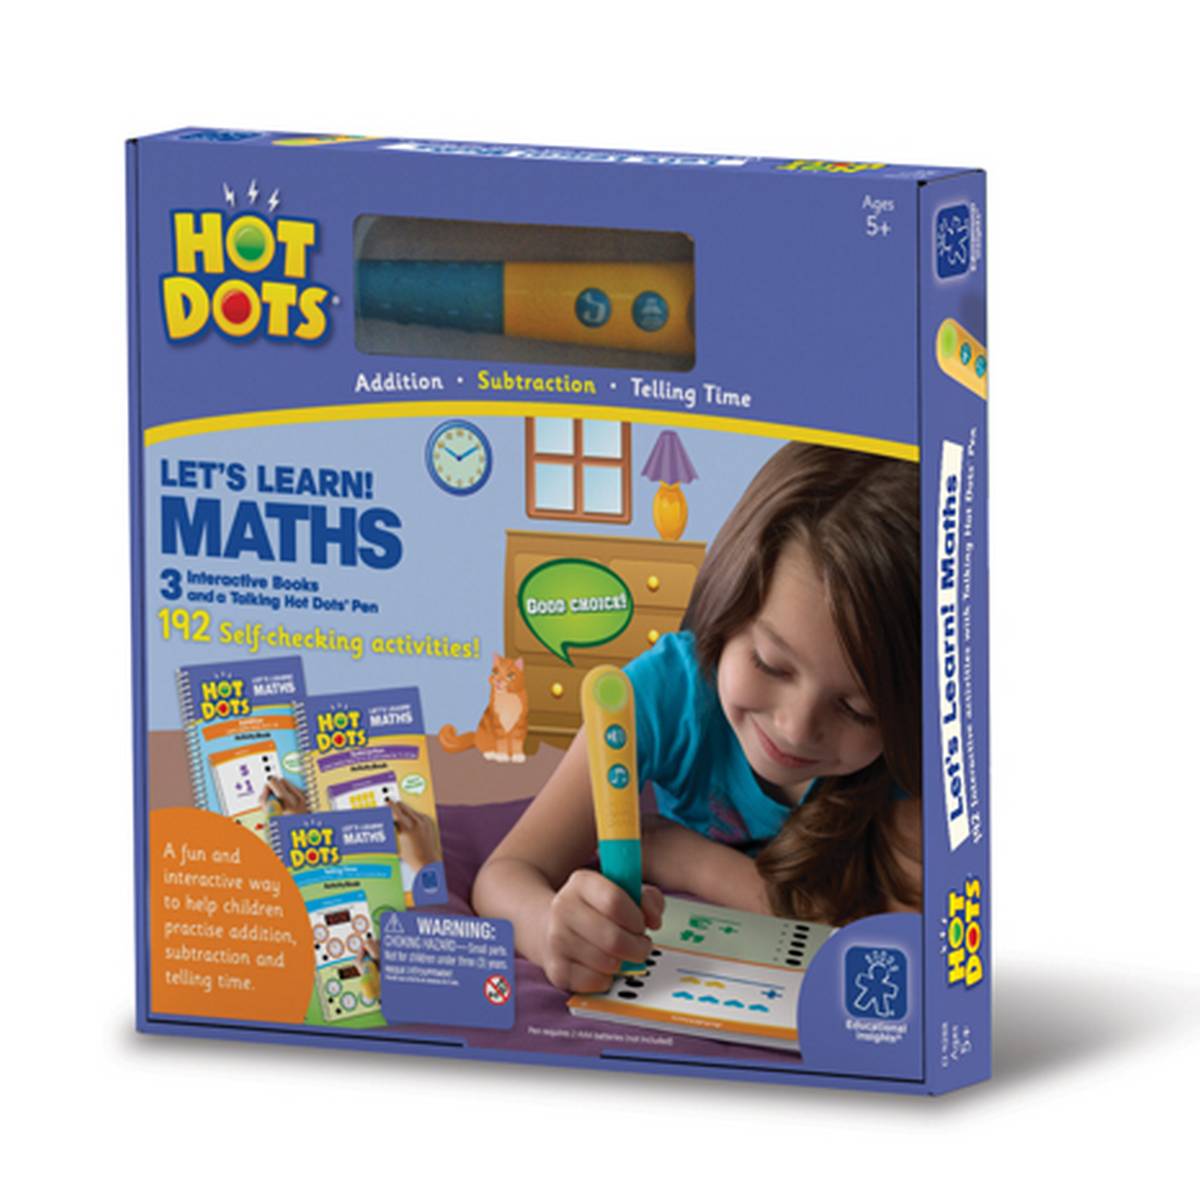 Hot Dots Let's Learn! Maths